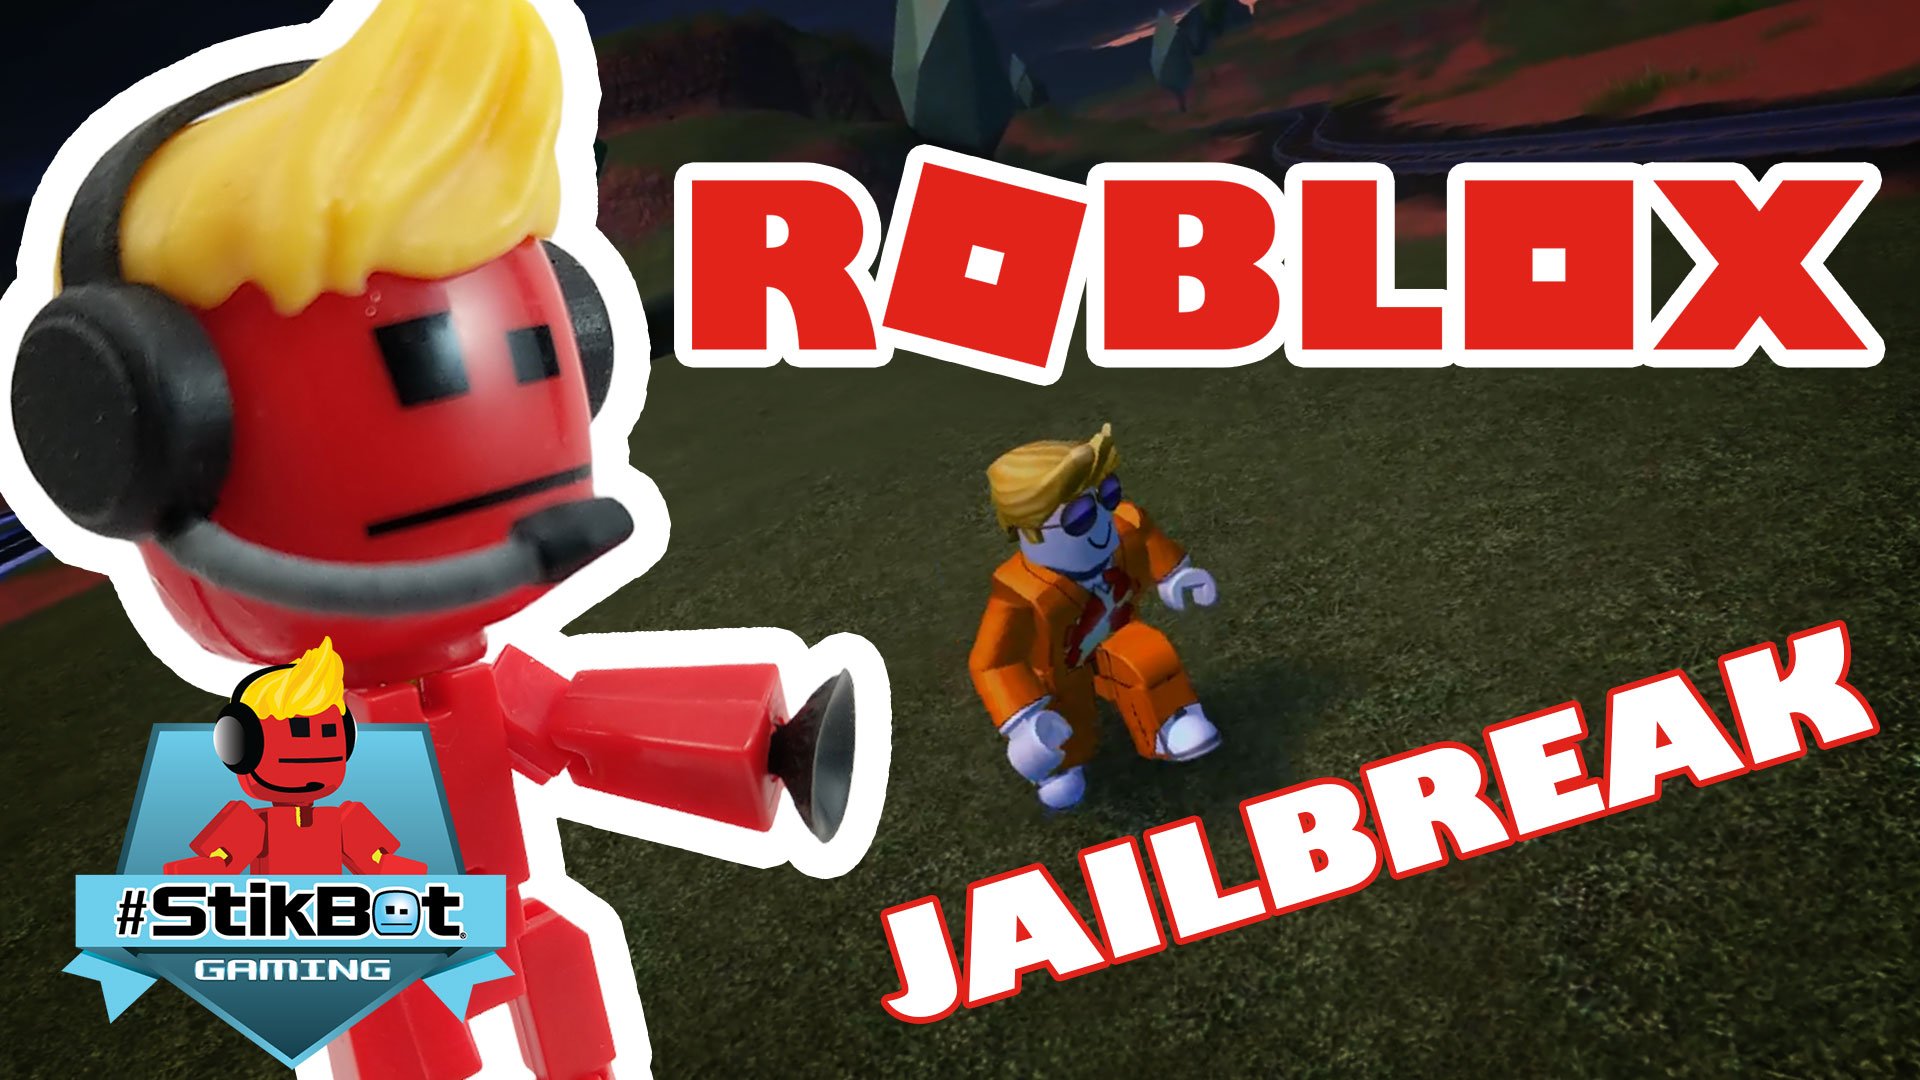 Stikbot On Twitter Hey Fanbots Welcome To Another Edition Of Stikbot Gaming On This Episode I Am Going To Play Roblox Jailbreak In This Game I Get In A Lot Of Trouble Https T Co 2onqixinov Stikbot Stikbotgaming Roblox Jailbreak Robloxjailbreak - stikbot plays roblox